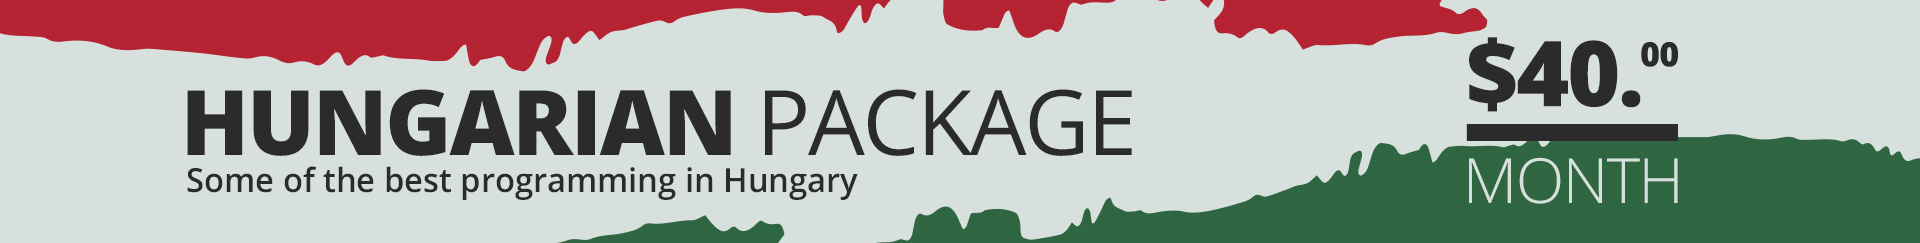 Hungarian Package TV Banner